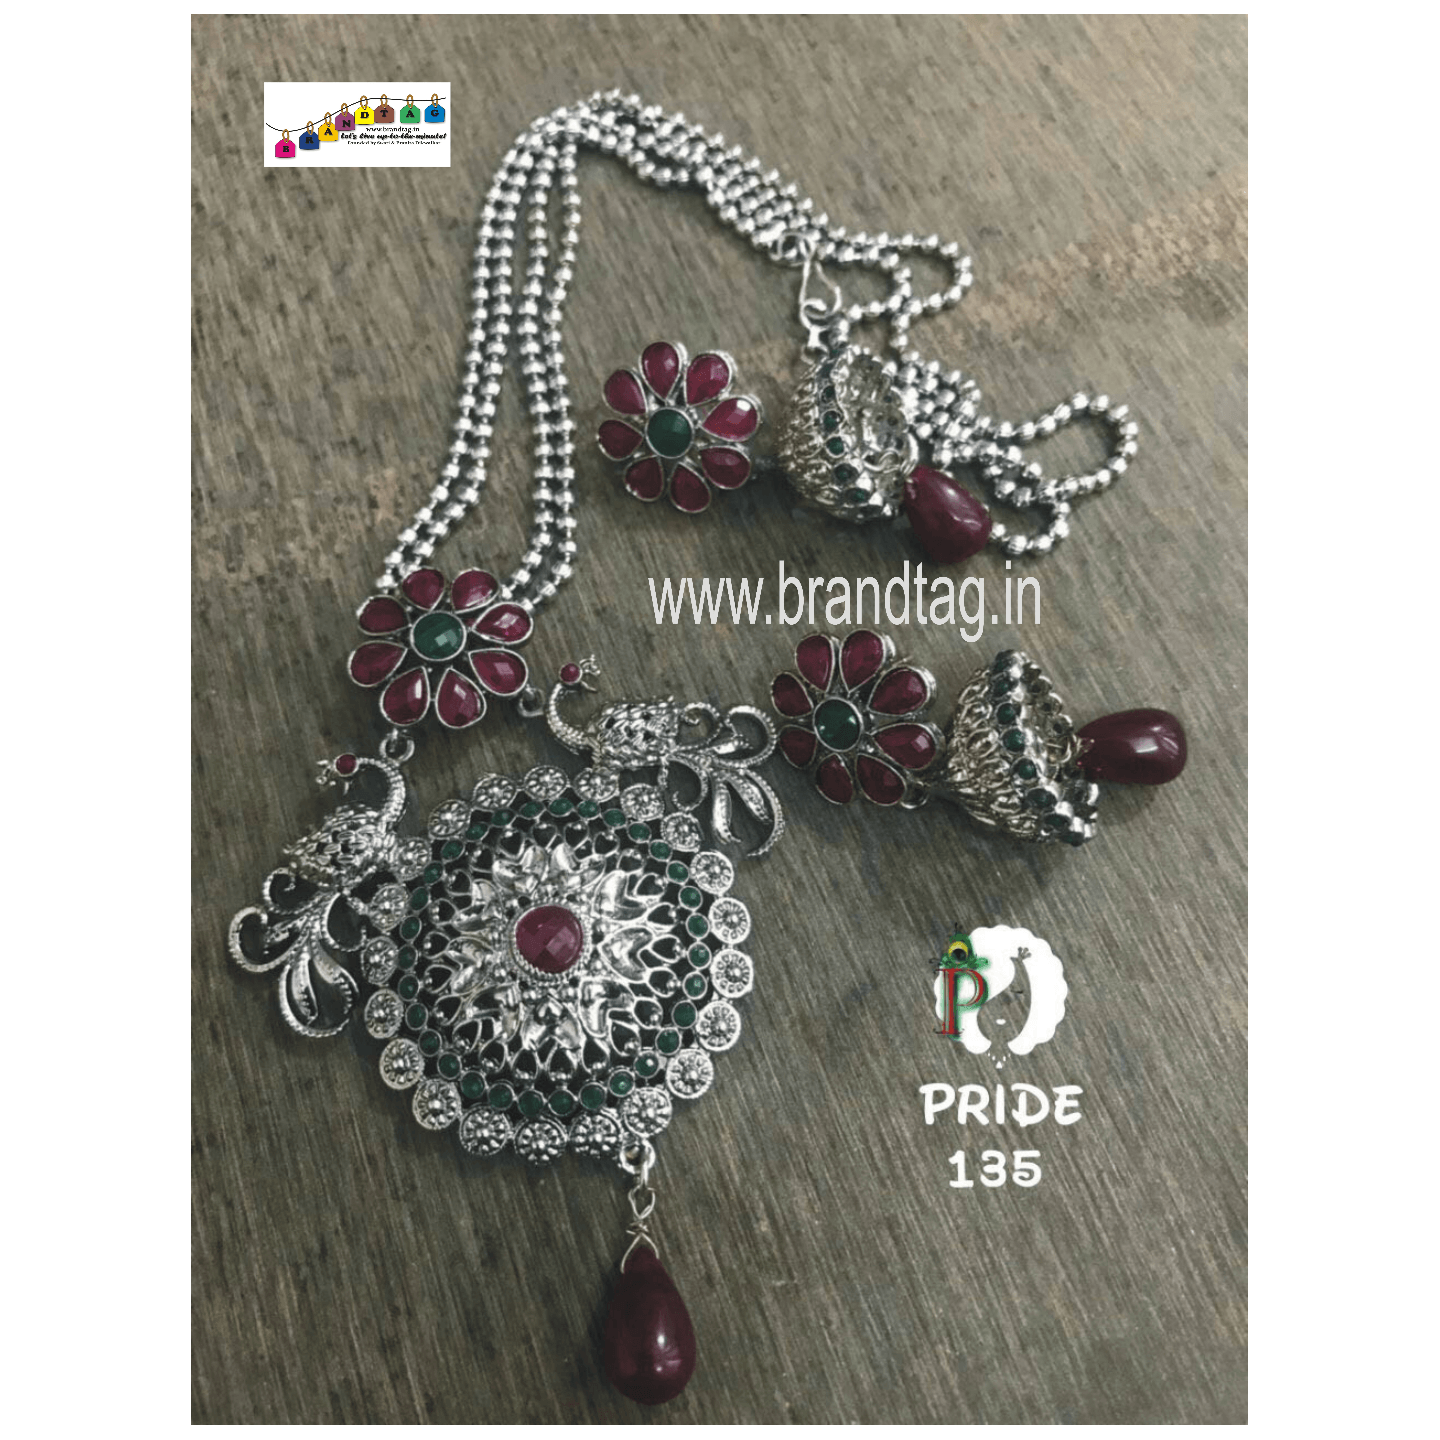 Exclusive Diwali Collection - Silver Twin Peacock Long Pendant Set!